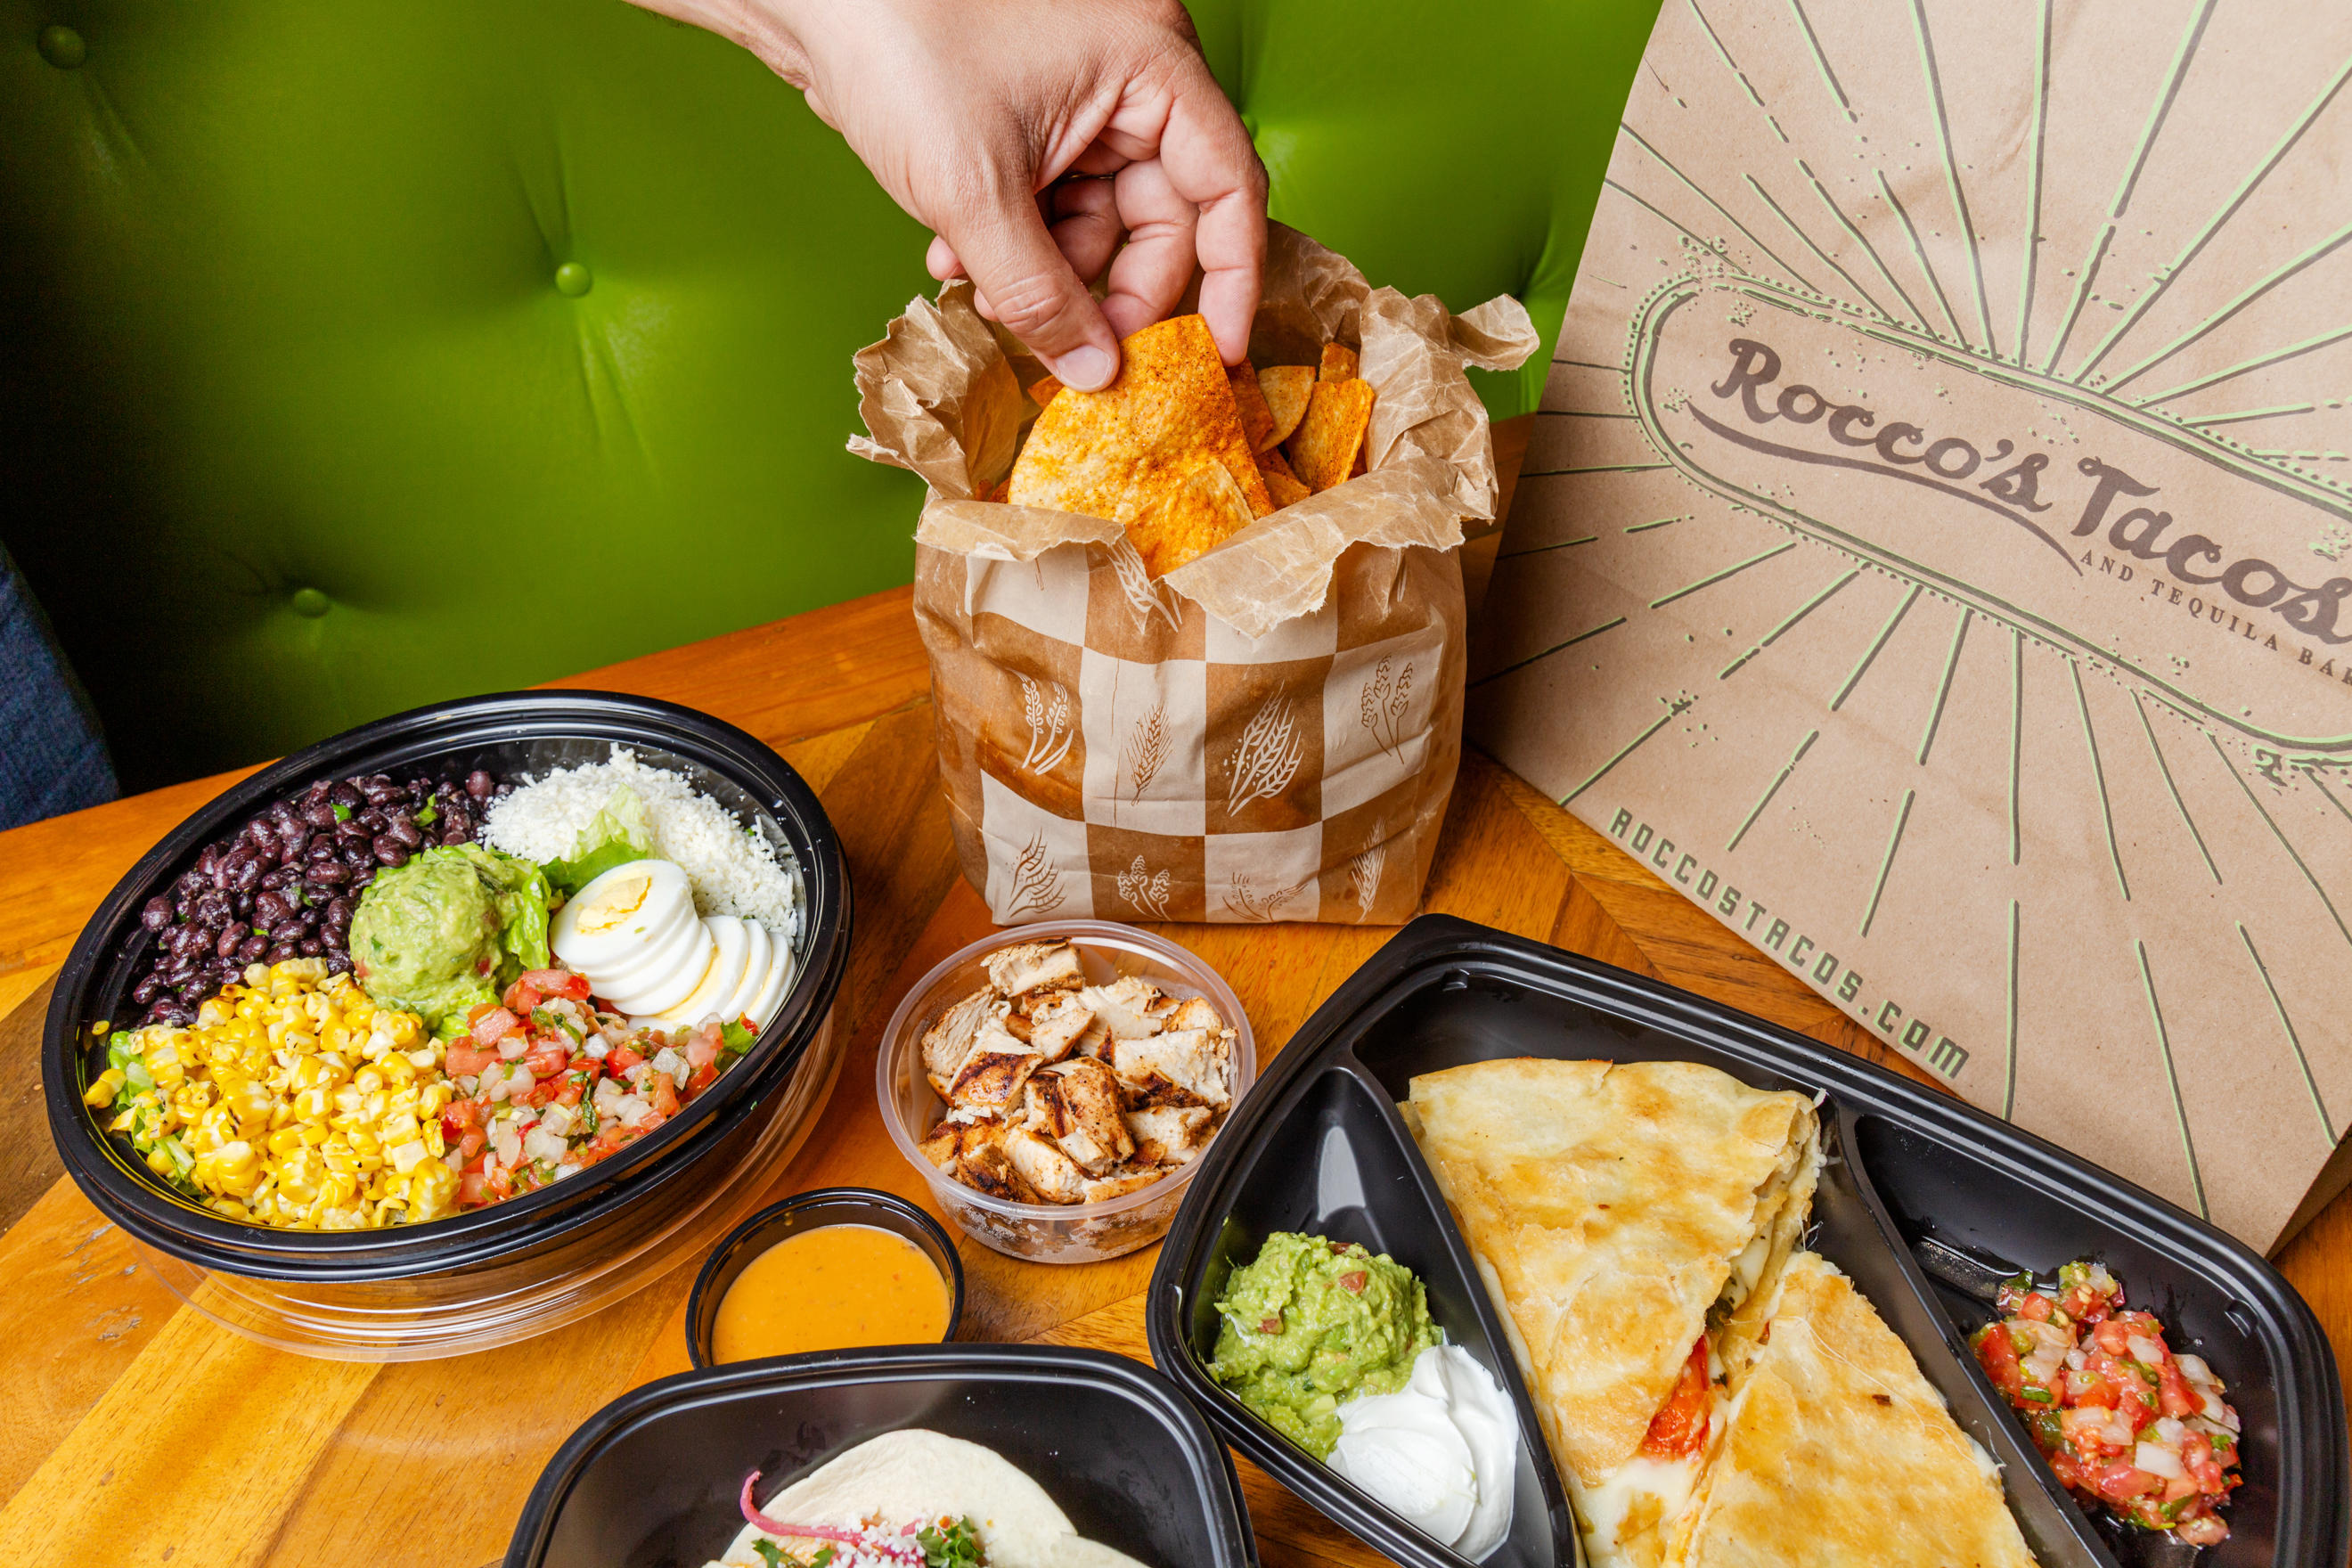 Order takeout from Rocco's Tacos & Tequila Bar, and let the fiesta begin! Order Online & Pick-Up Tod Rocco's Tacos & Tequila Bar Boca Raton (561)416-2131